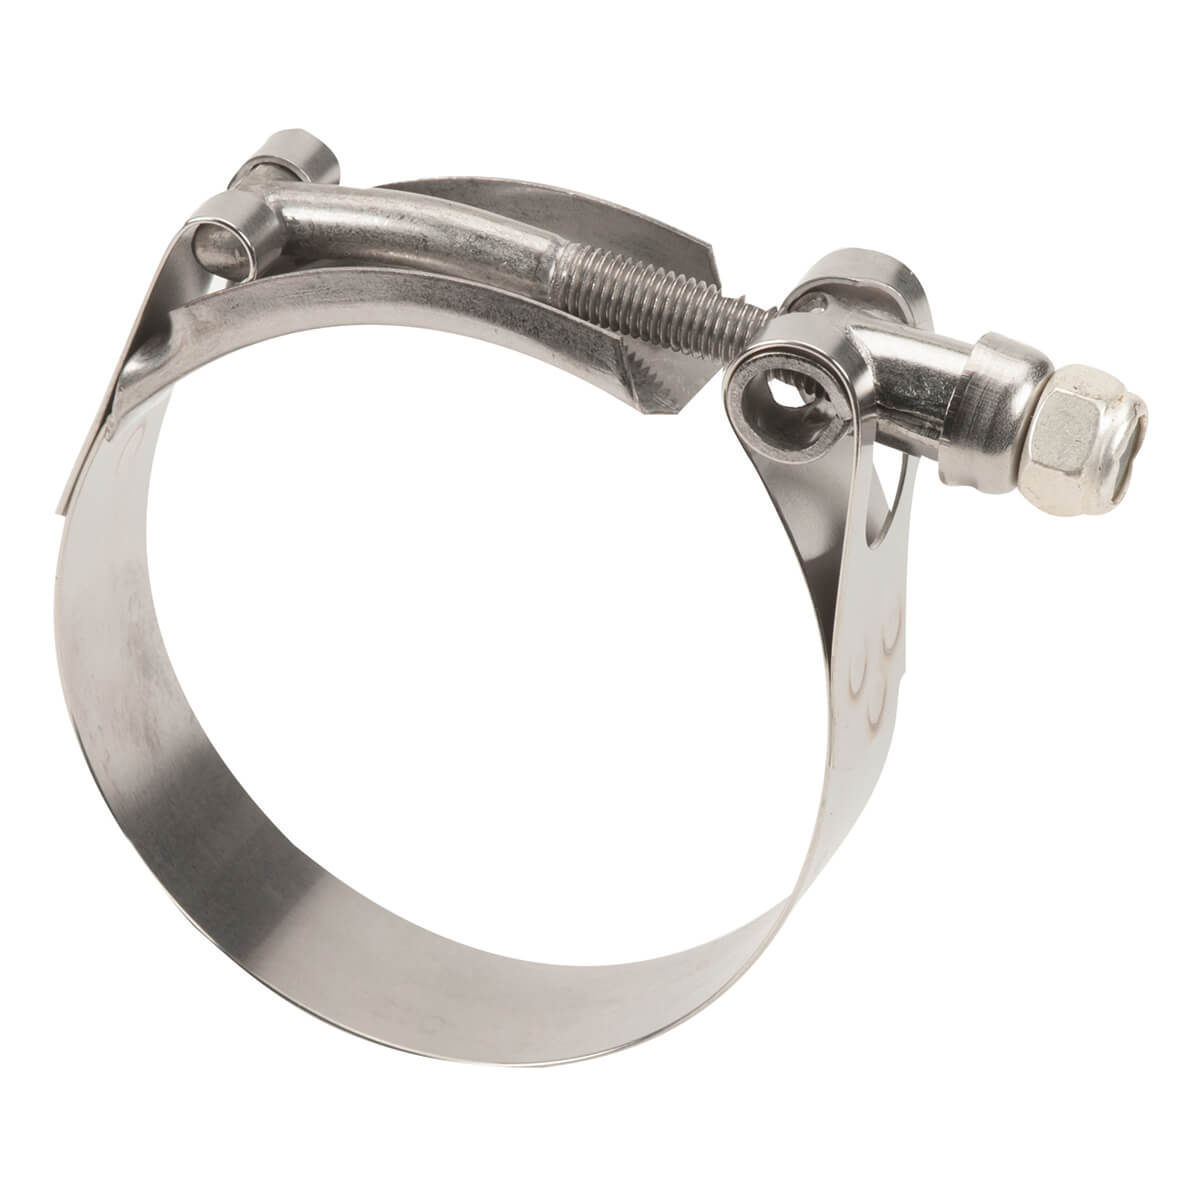 T-Bolt Hose Clamp - 2-in